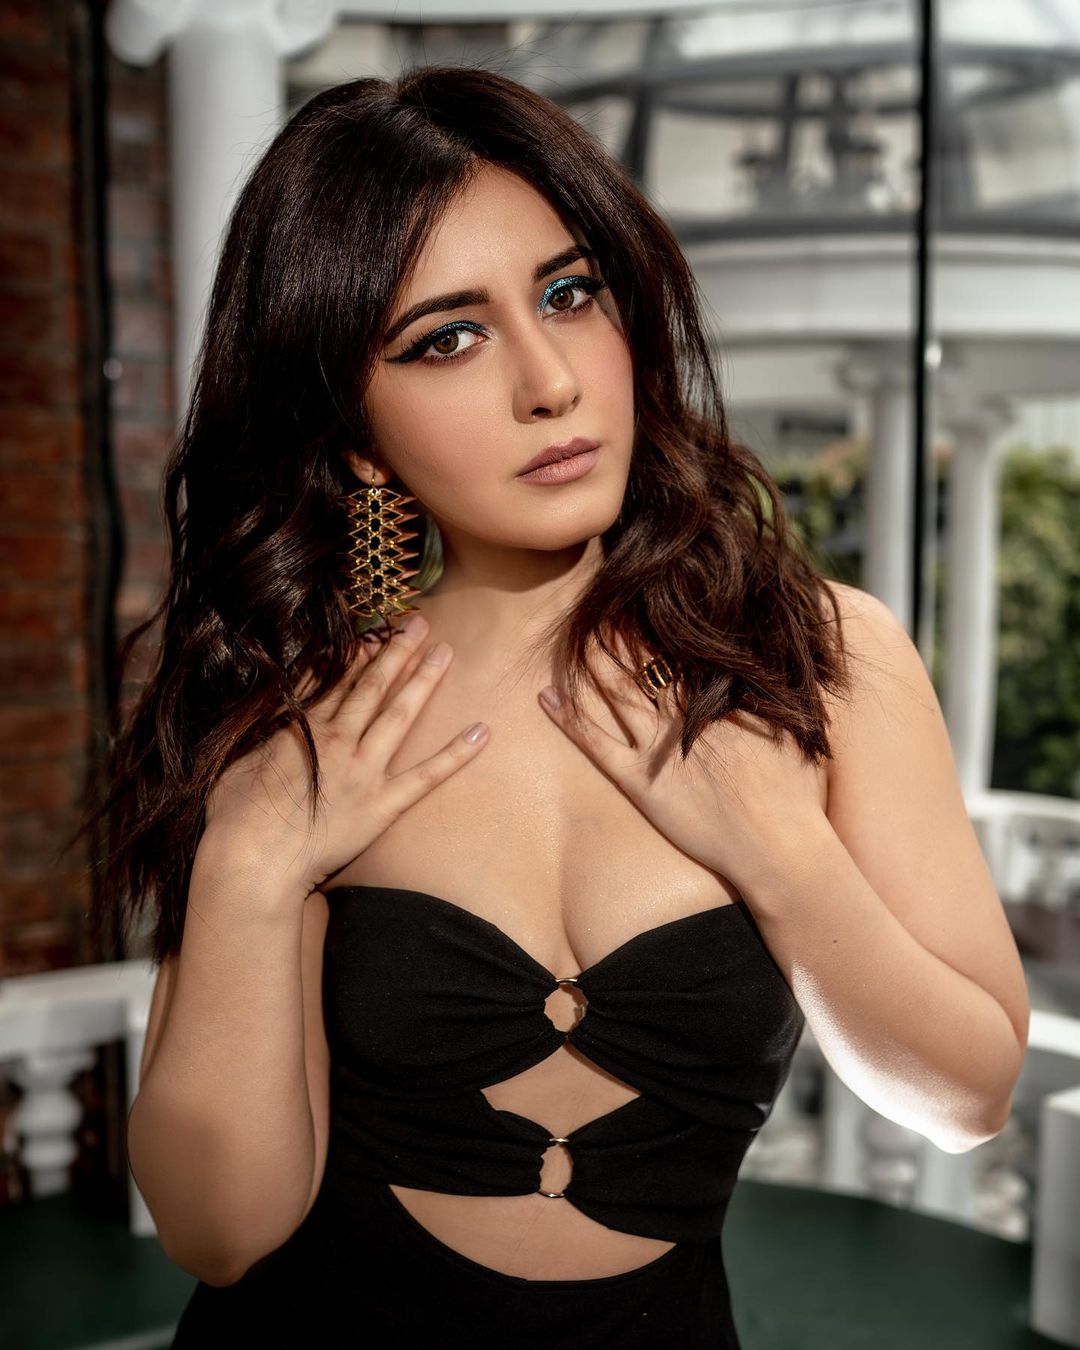 Raashii Khanna is raising temperatures with her latest photos in a black jumpsuit.